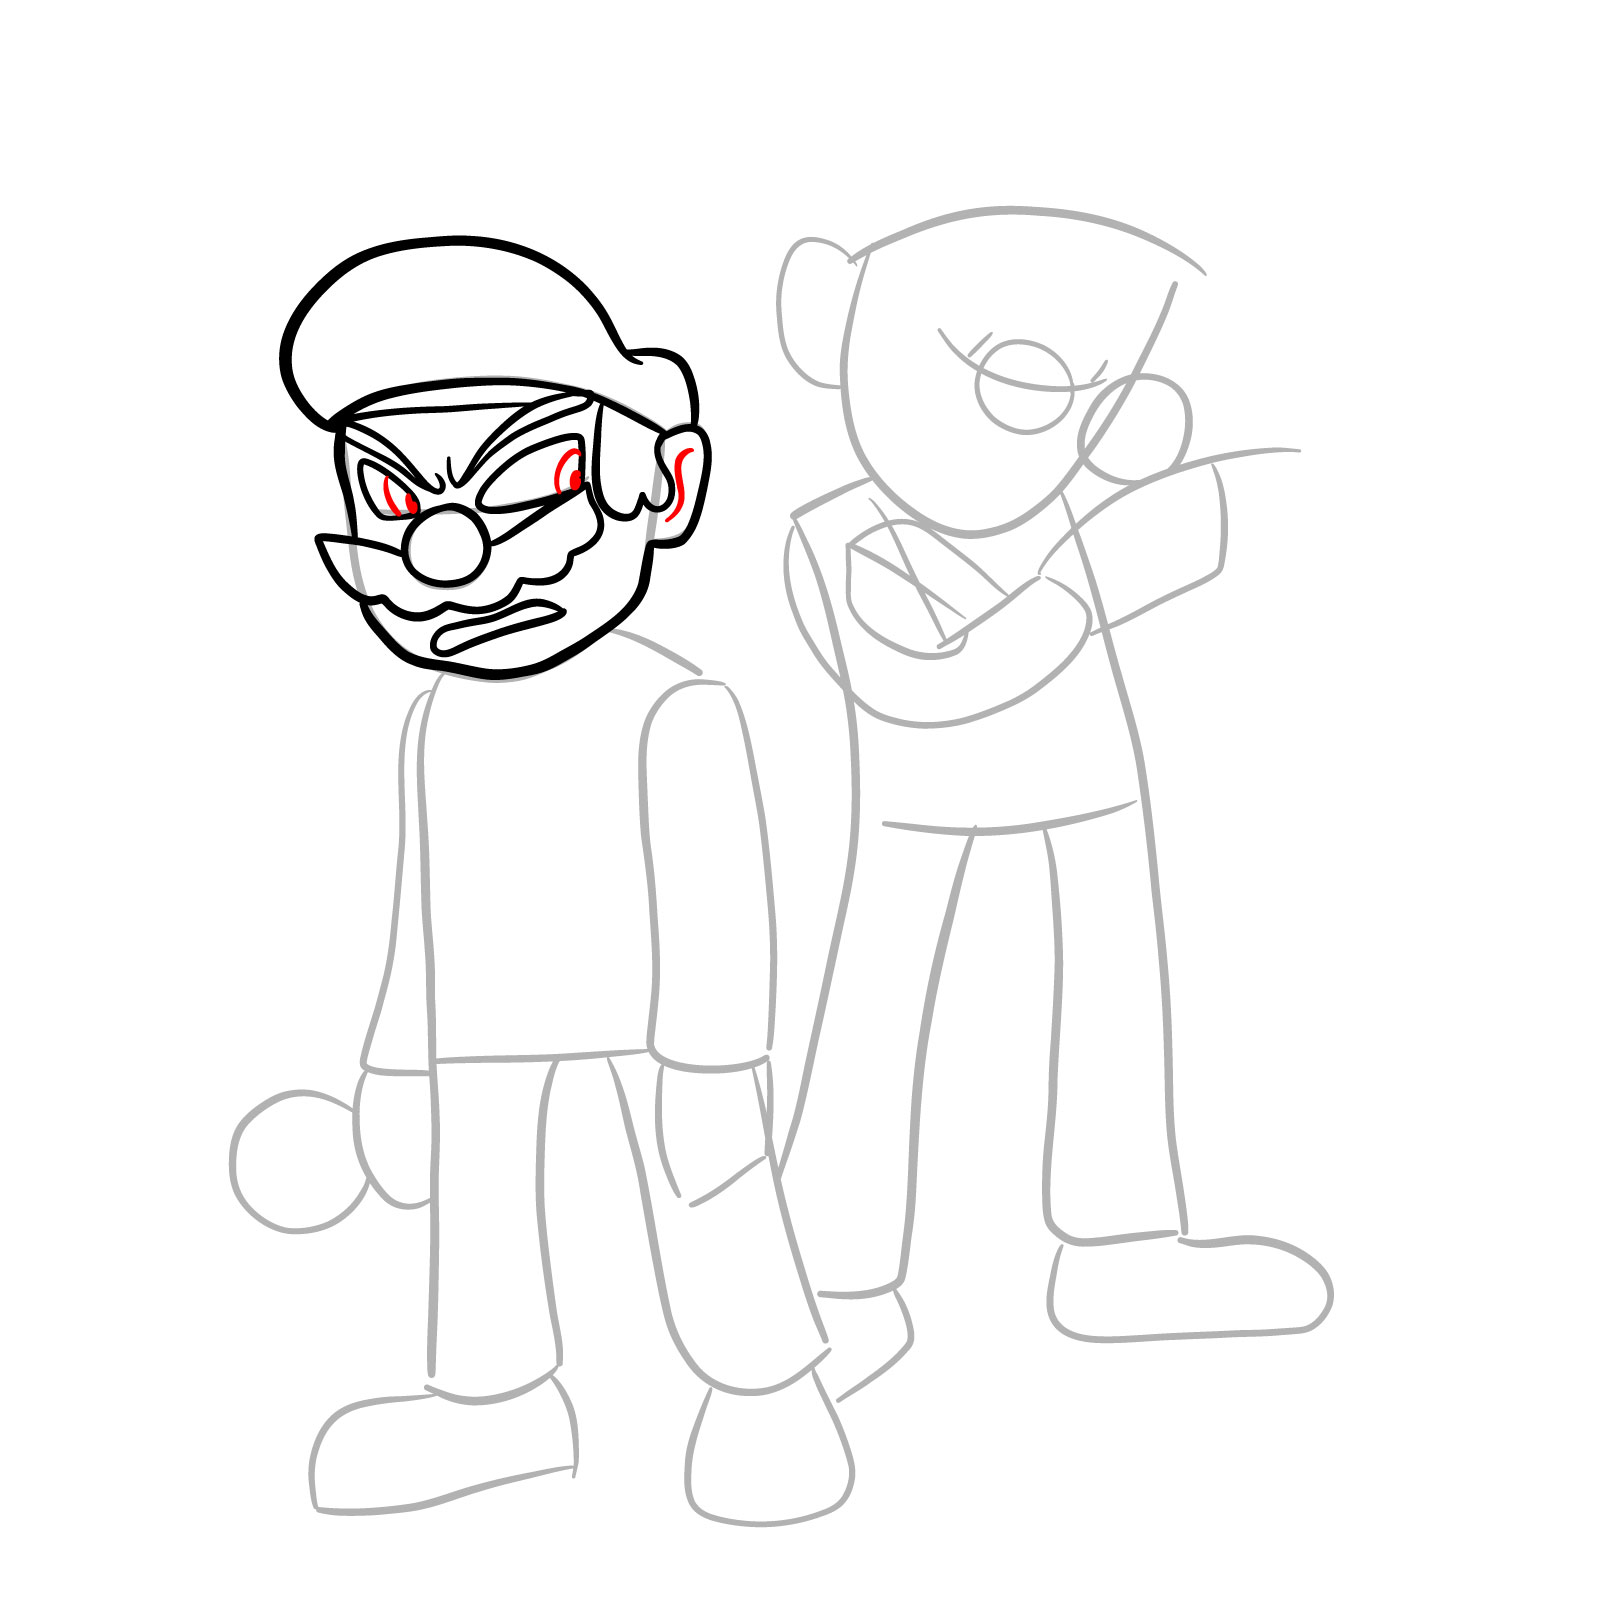 How to draw Mario and Luigi from Tails Gets Trolled - step 11